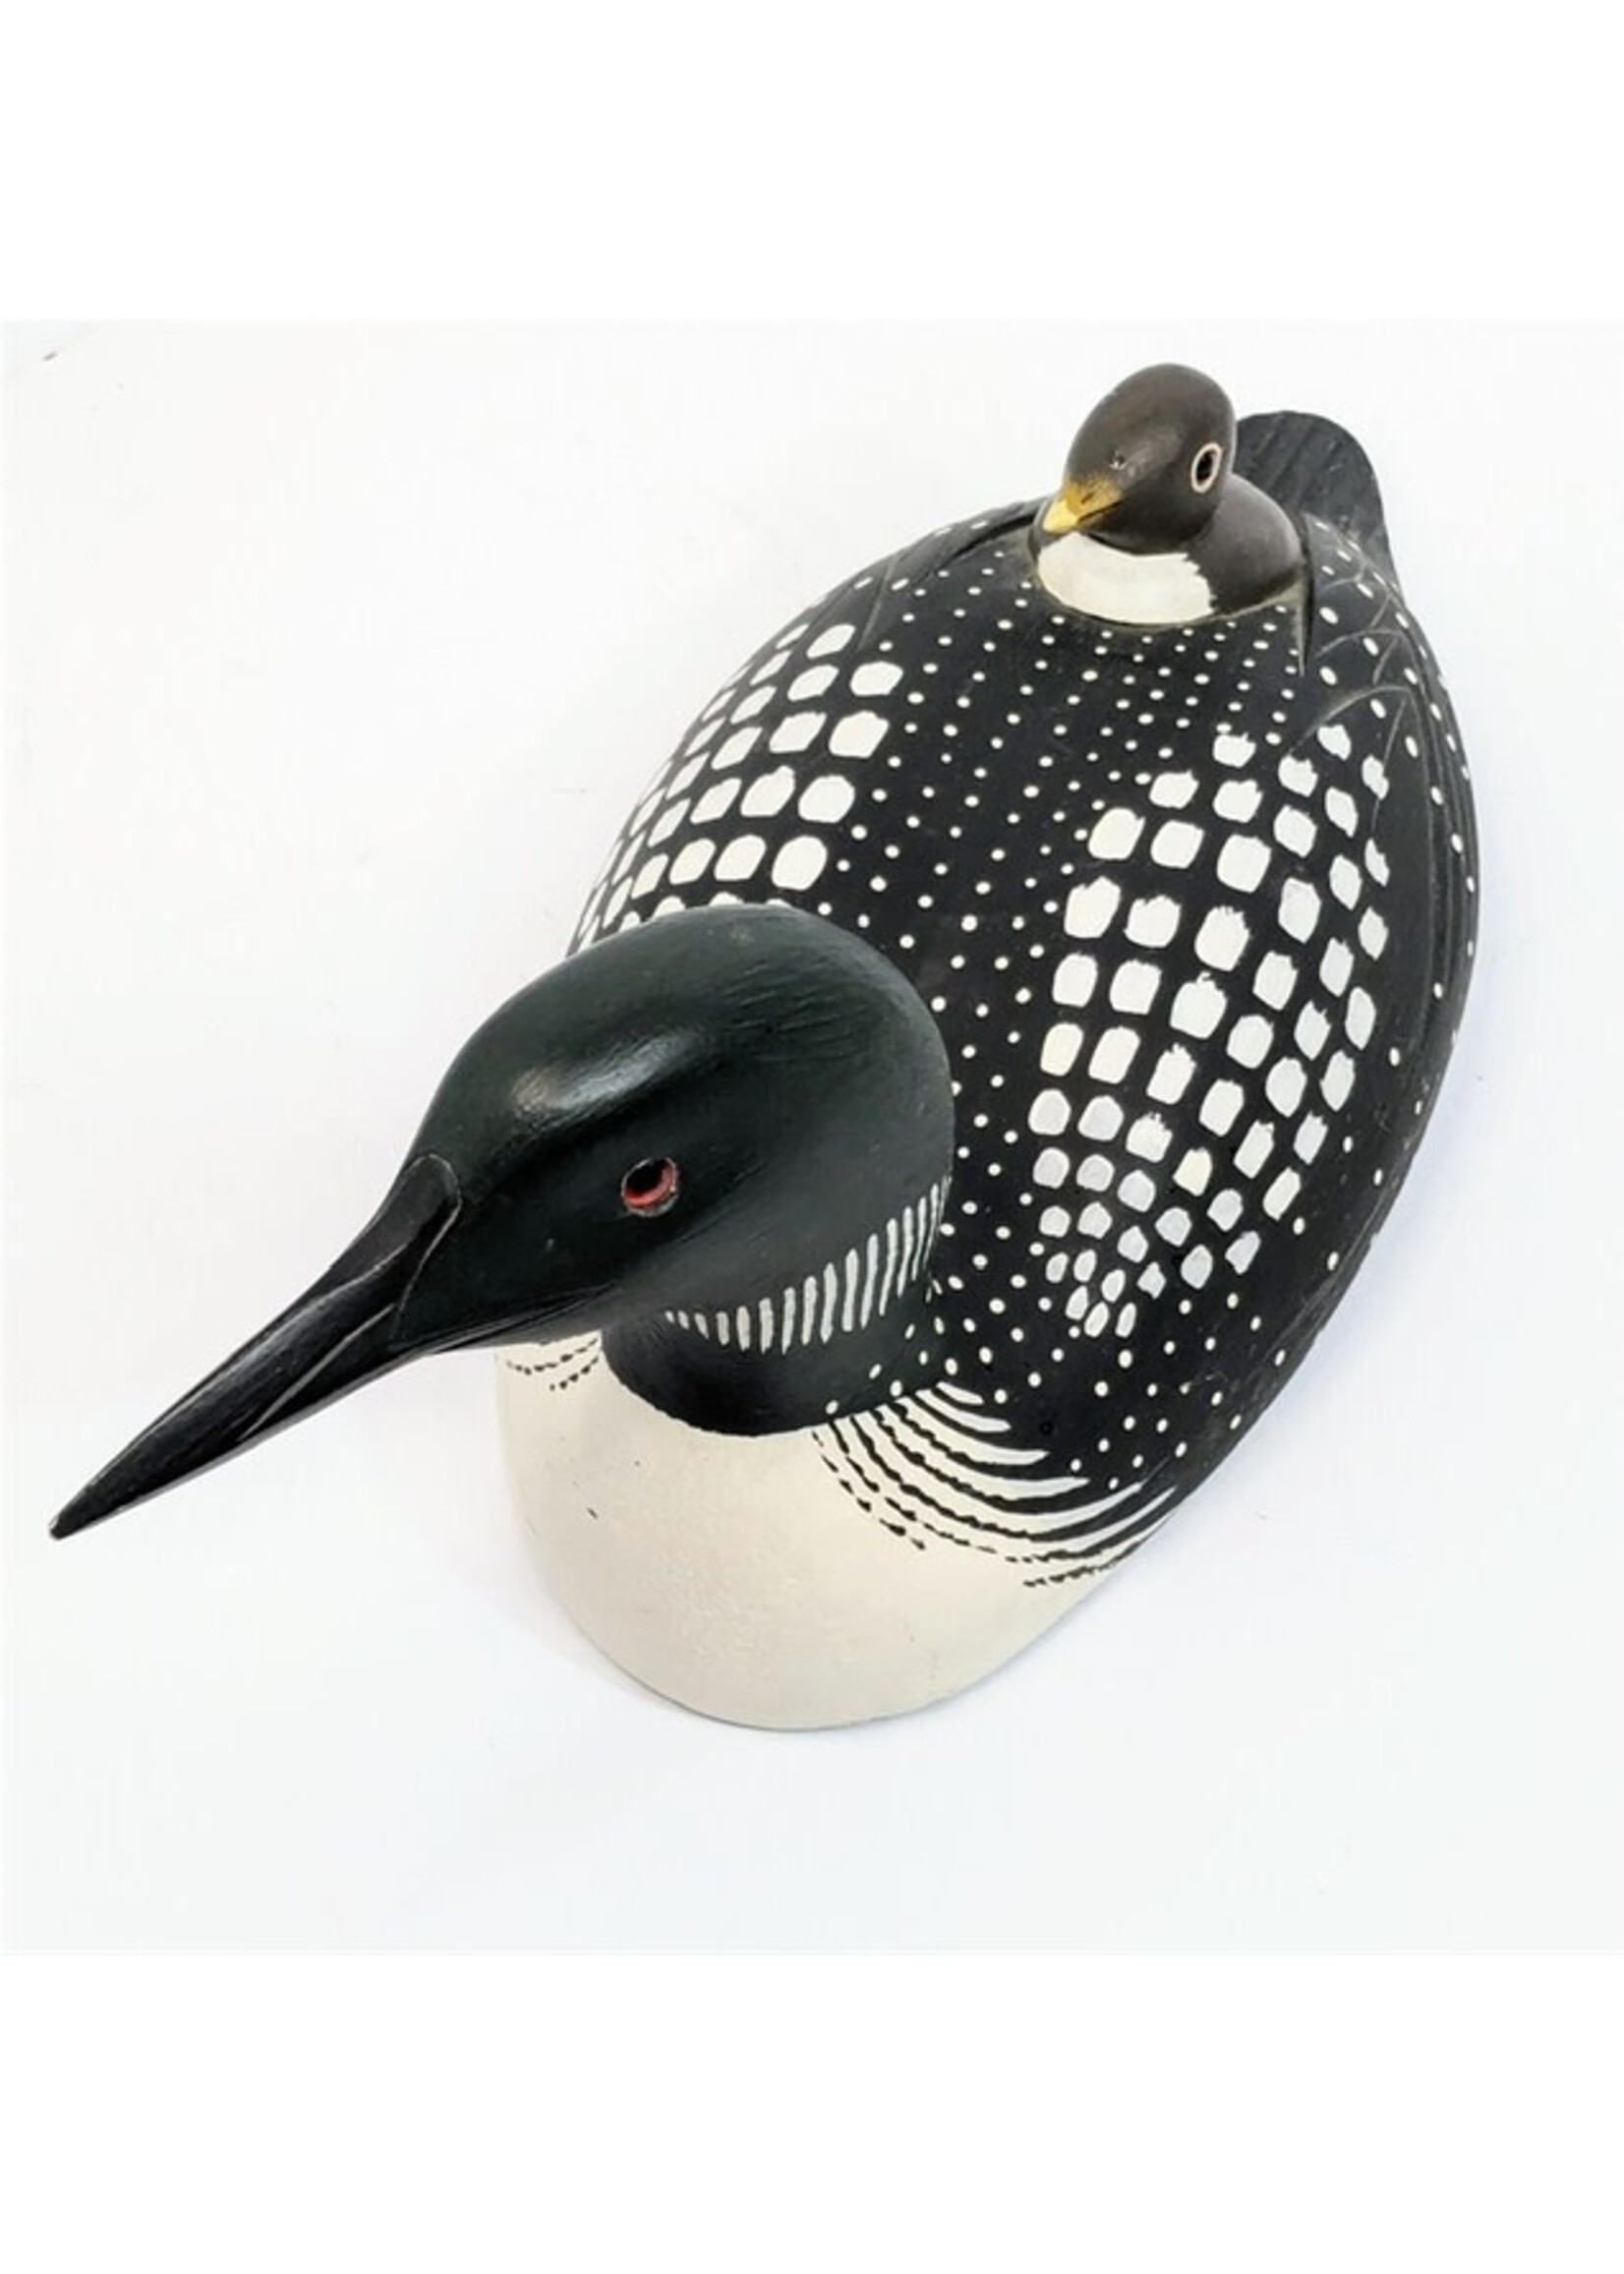 Vintage Loon Carving By T.Walker W. Glass Eyes